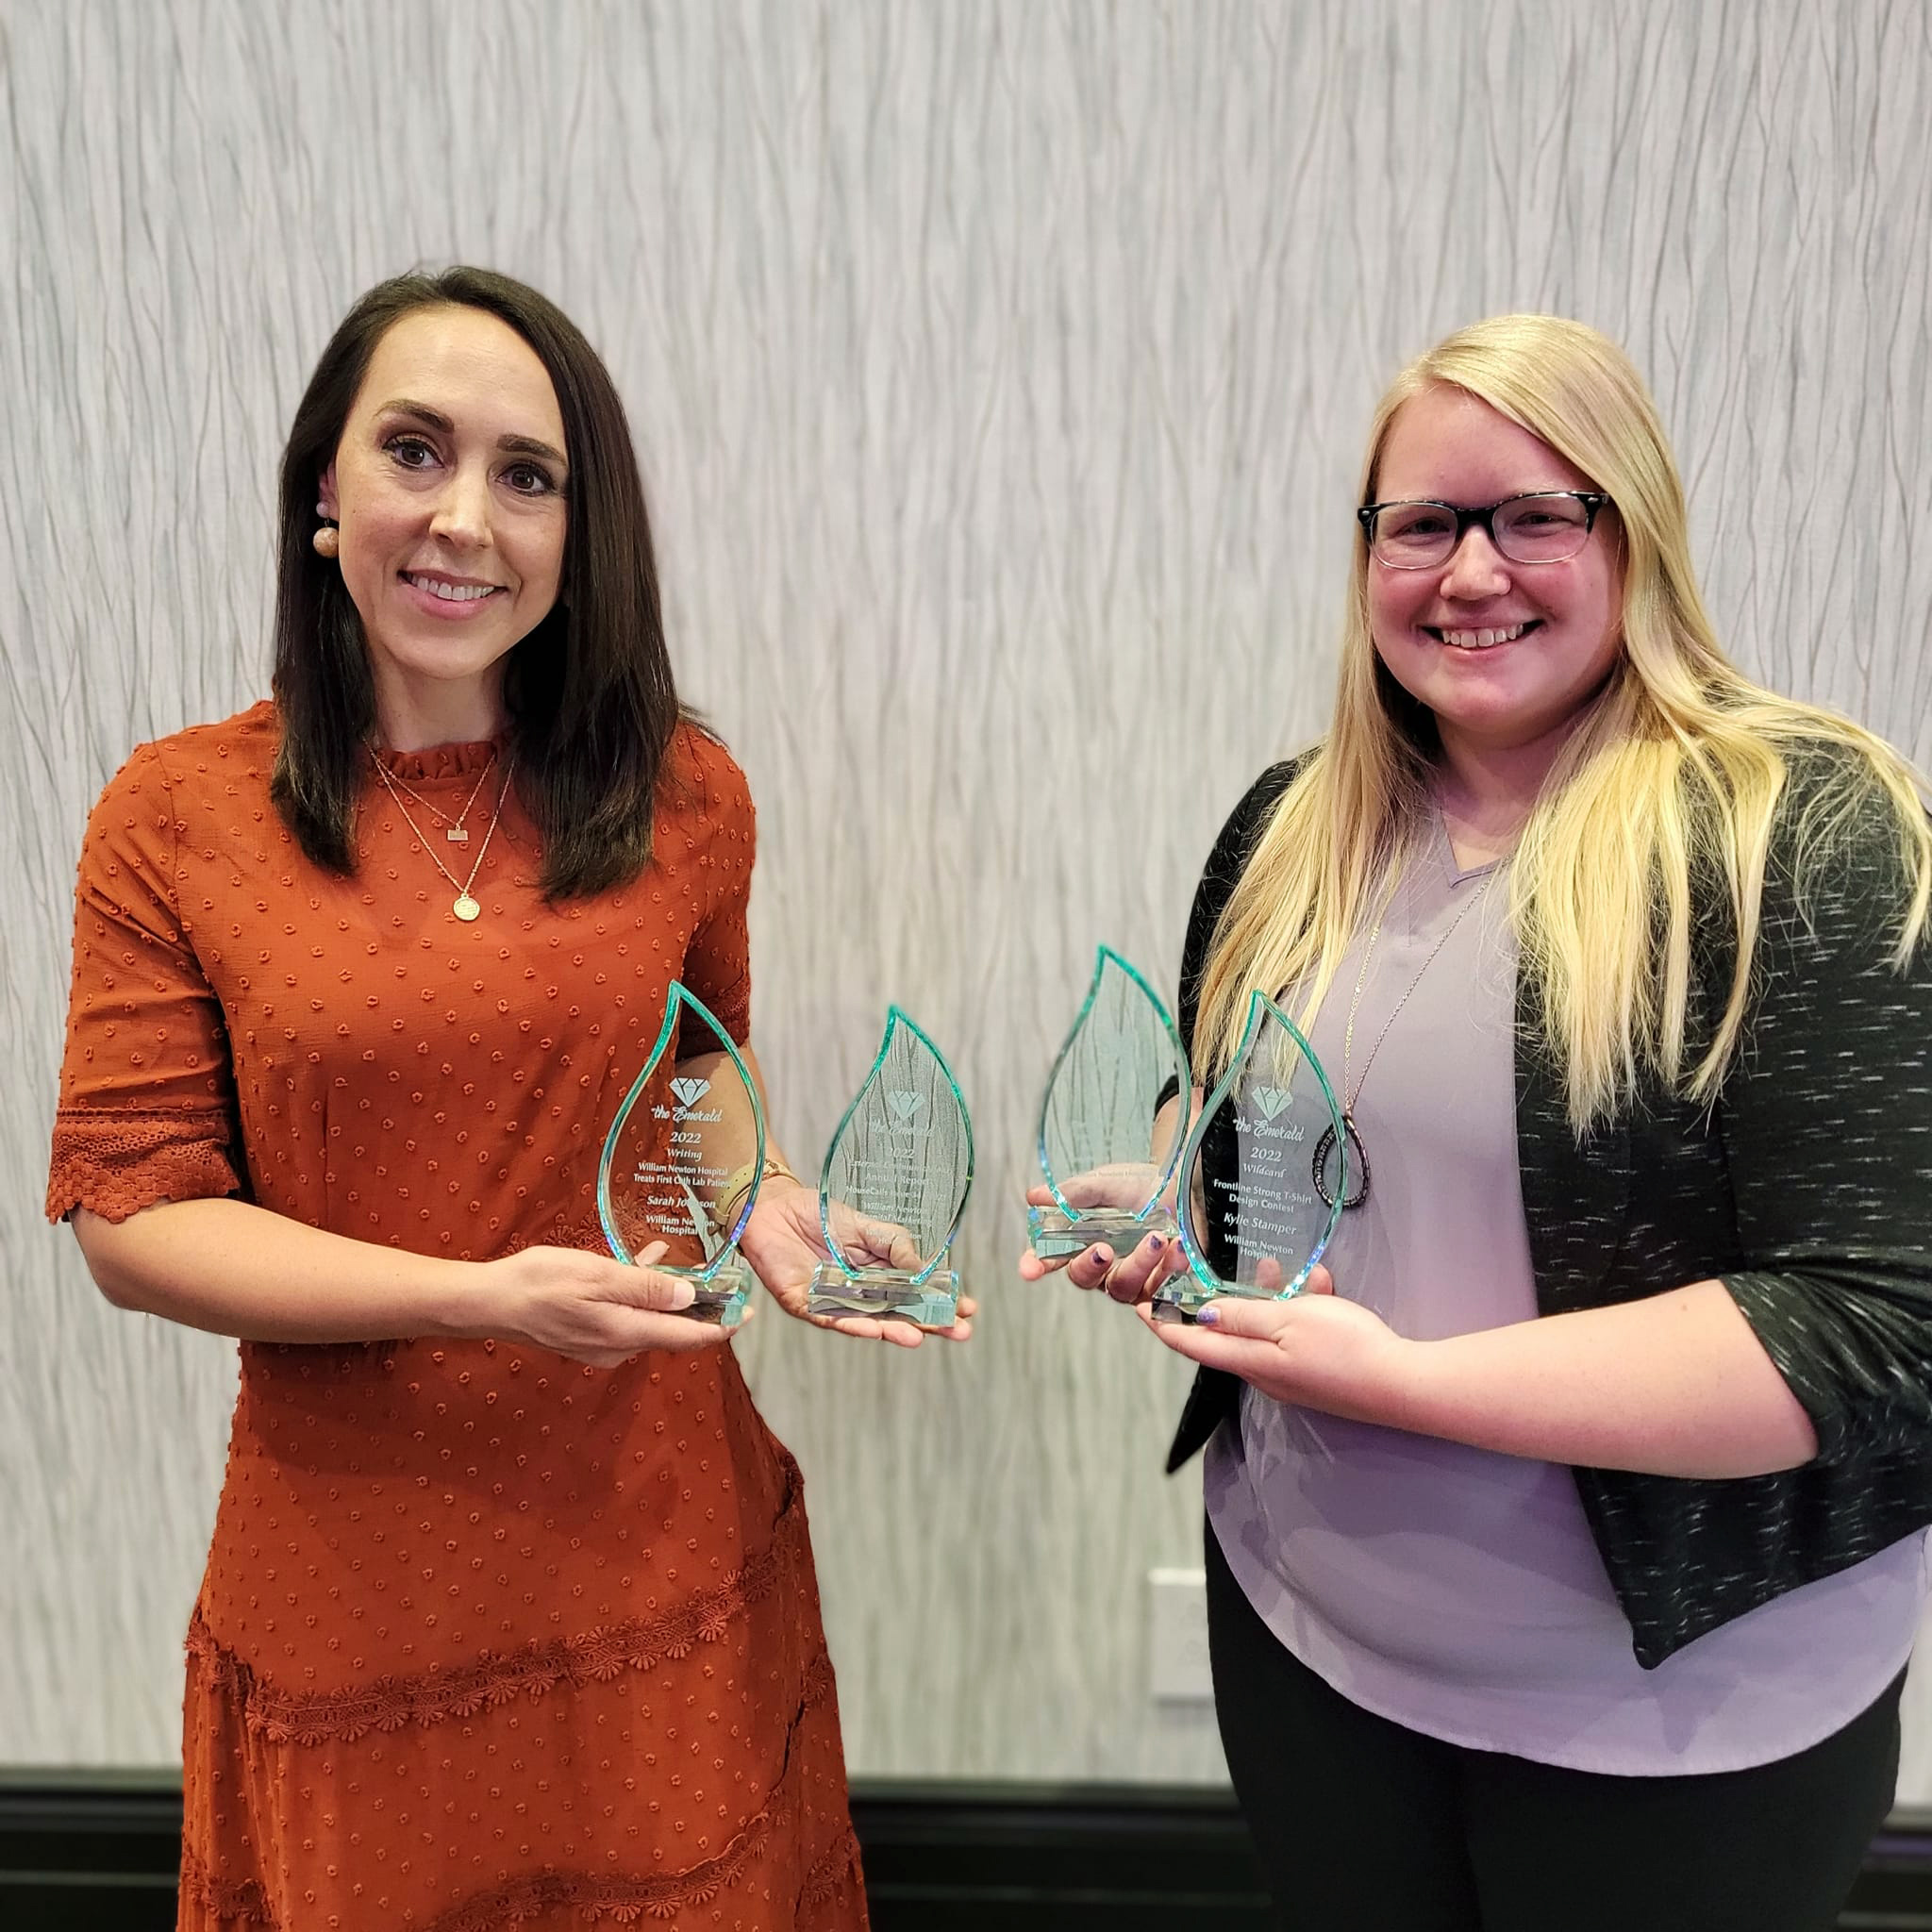 William Newton Hospital’s Sarah Johnson, left, and Kylie Stamper, right, display several awards earned for excellence in healthcare marketing and communications.